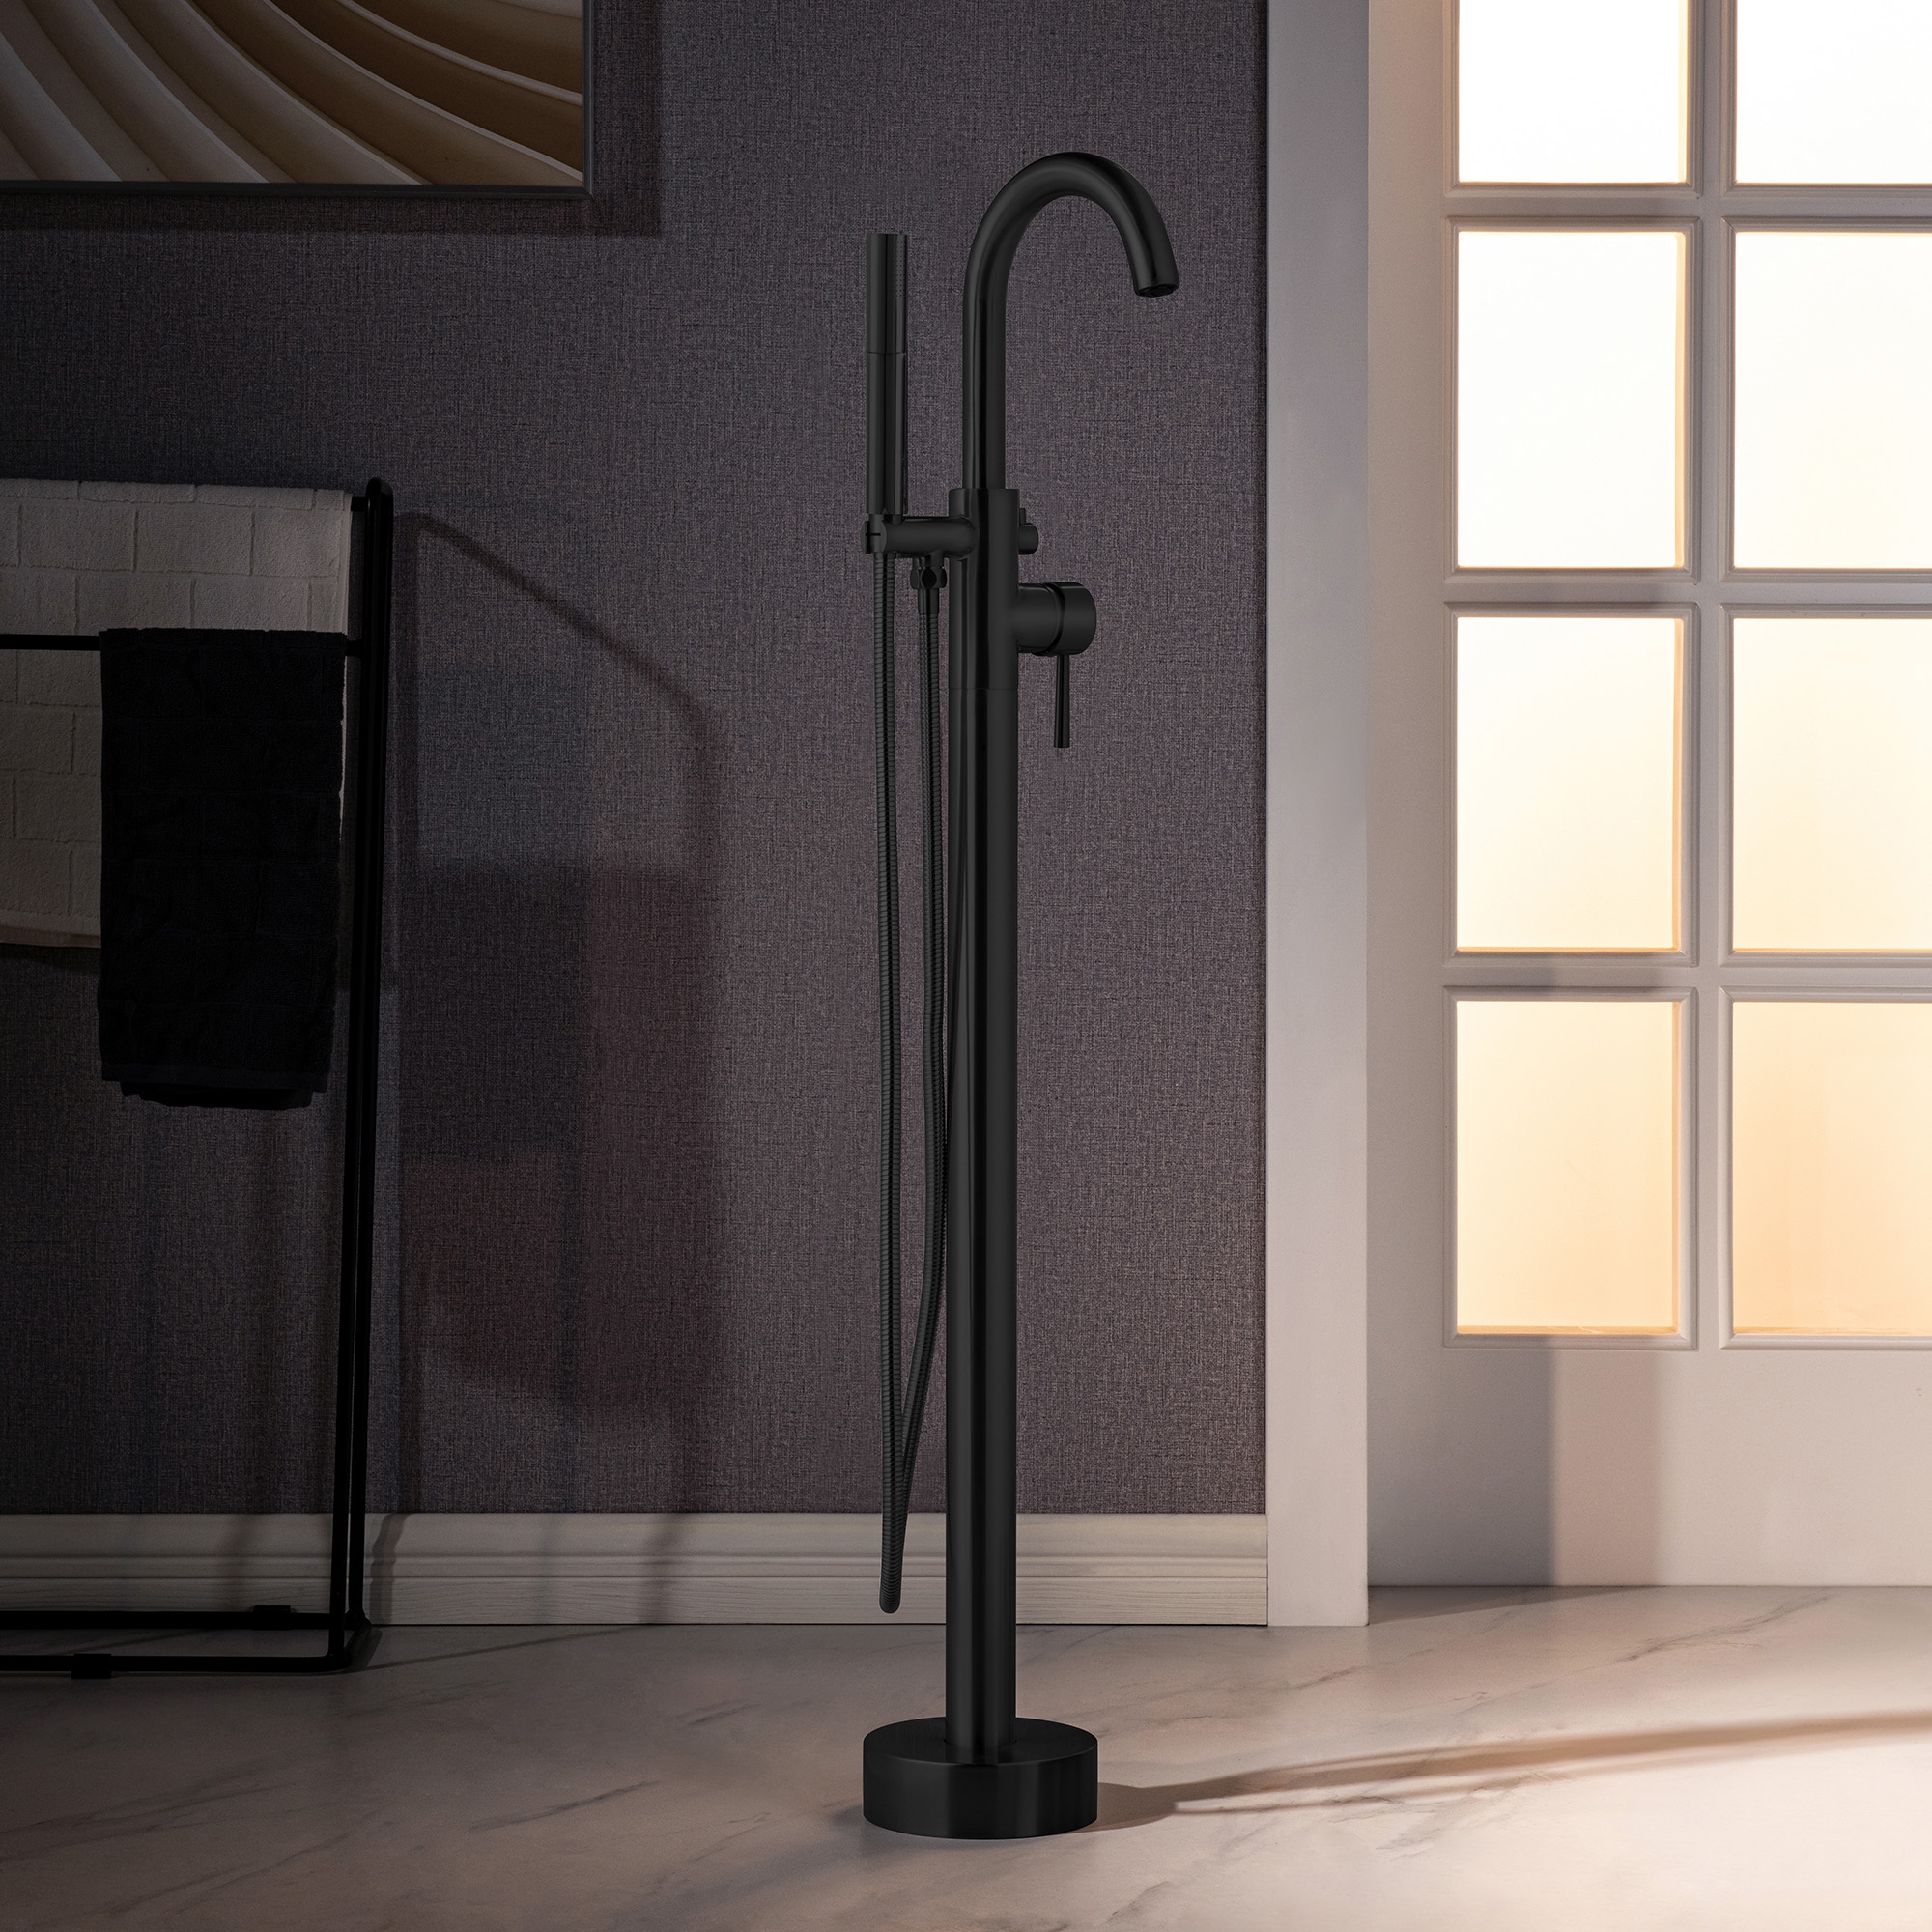 WOODBRIDGE F0025MBDR Contemporary Single Handle Floor Mount Freestanding Tub Filler Faucet with 2 Function Cylinder Style Hand Shower in Matte Black Finish.